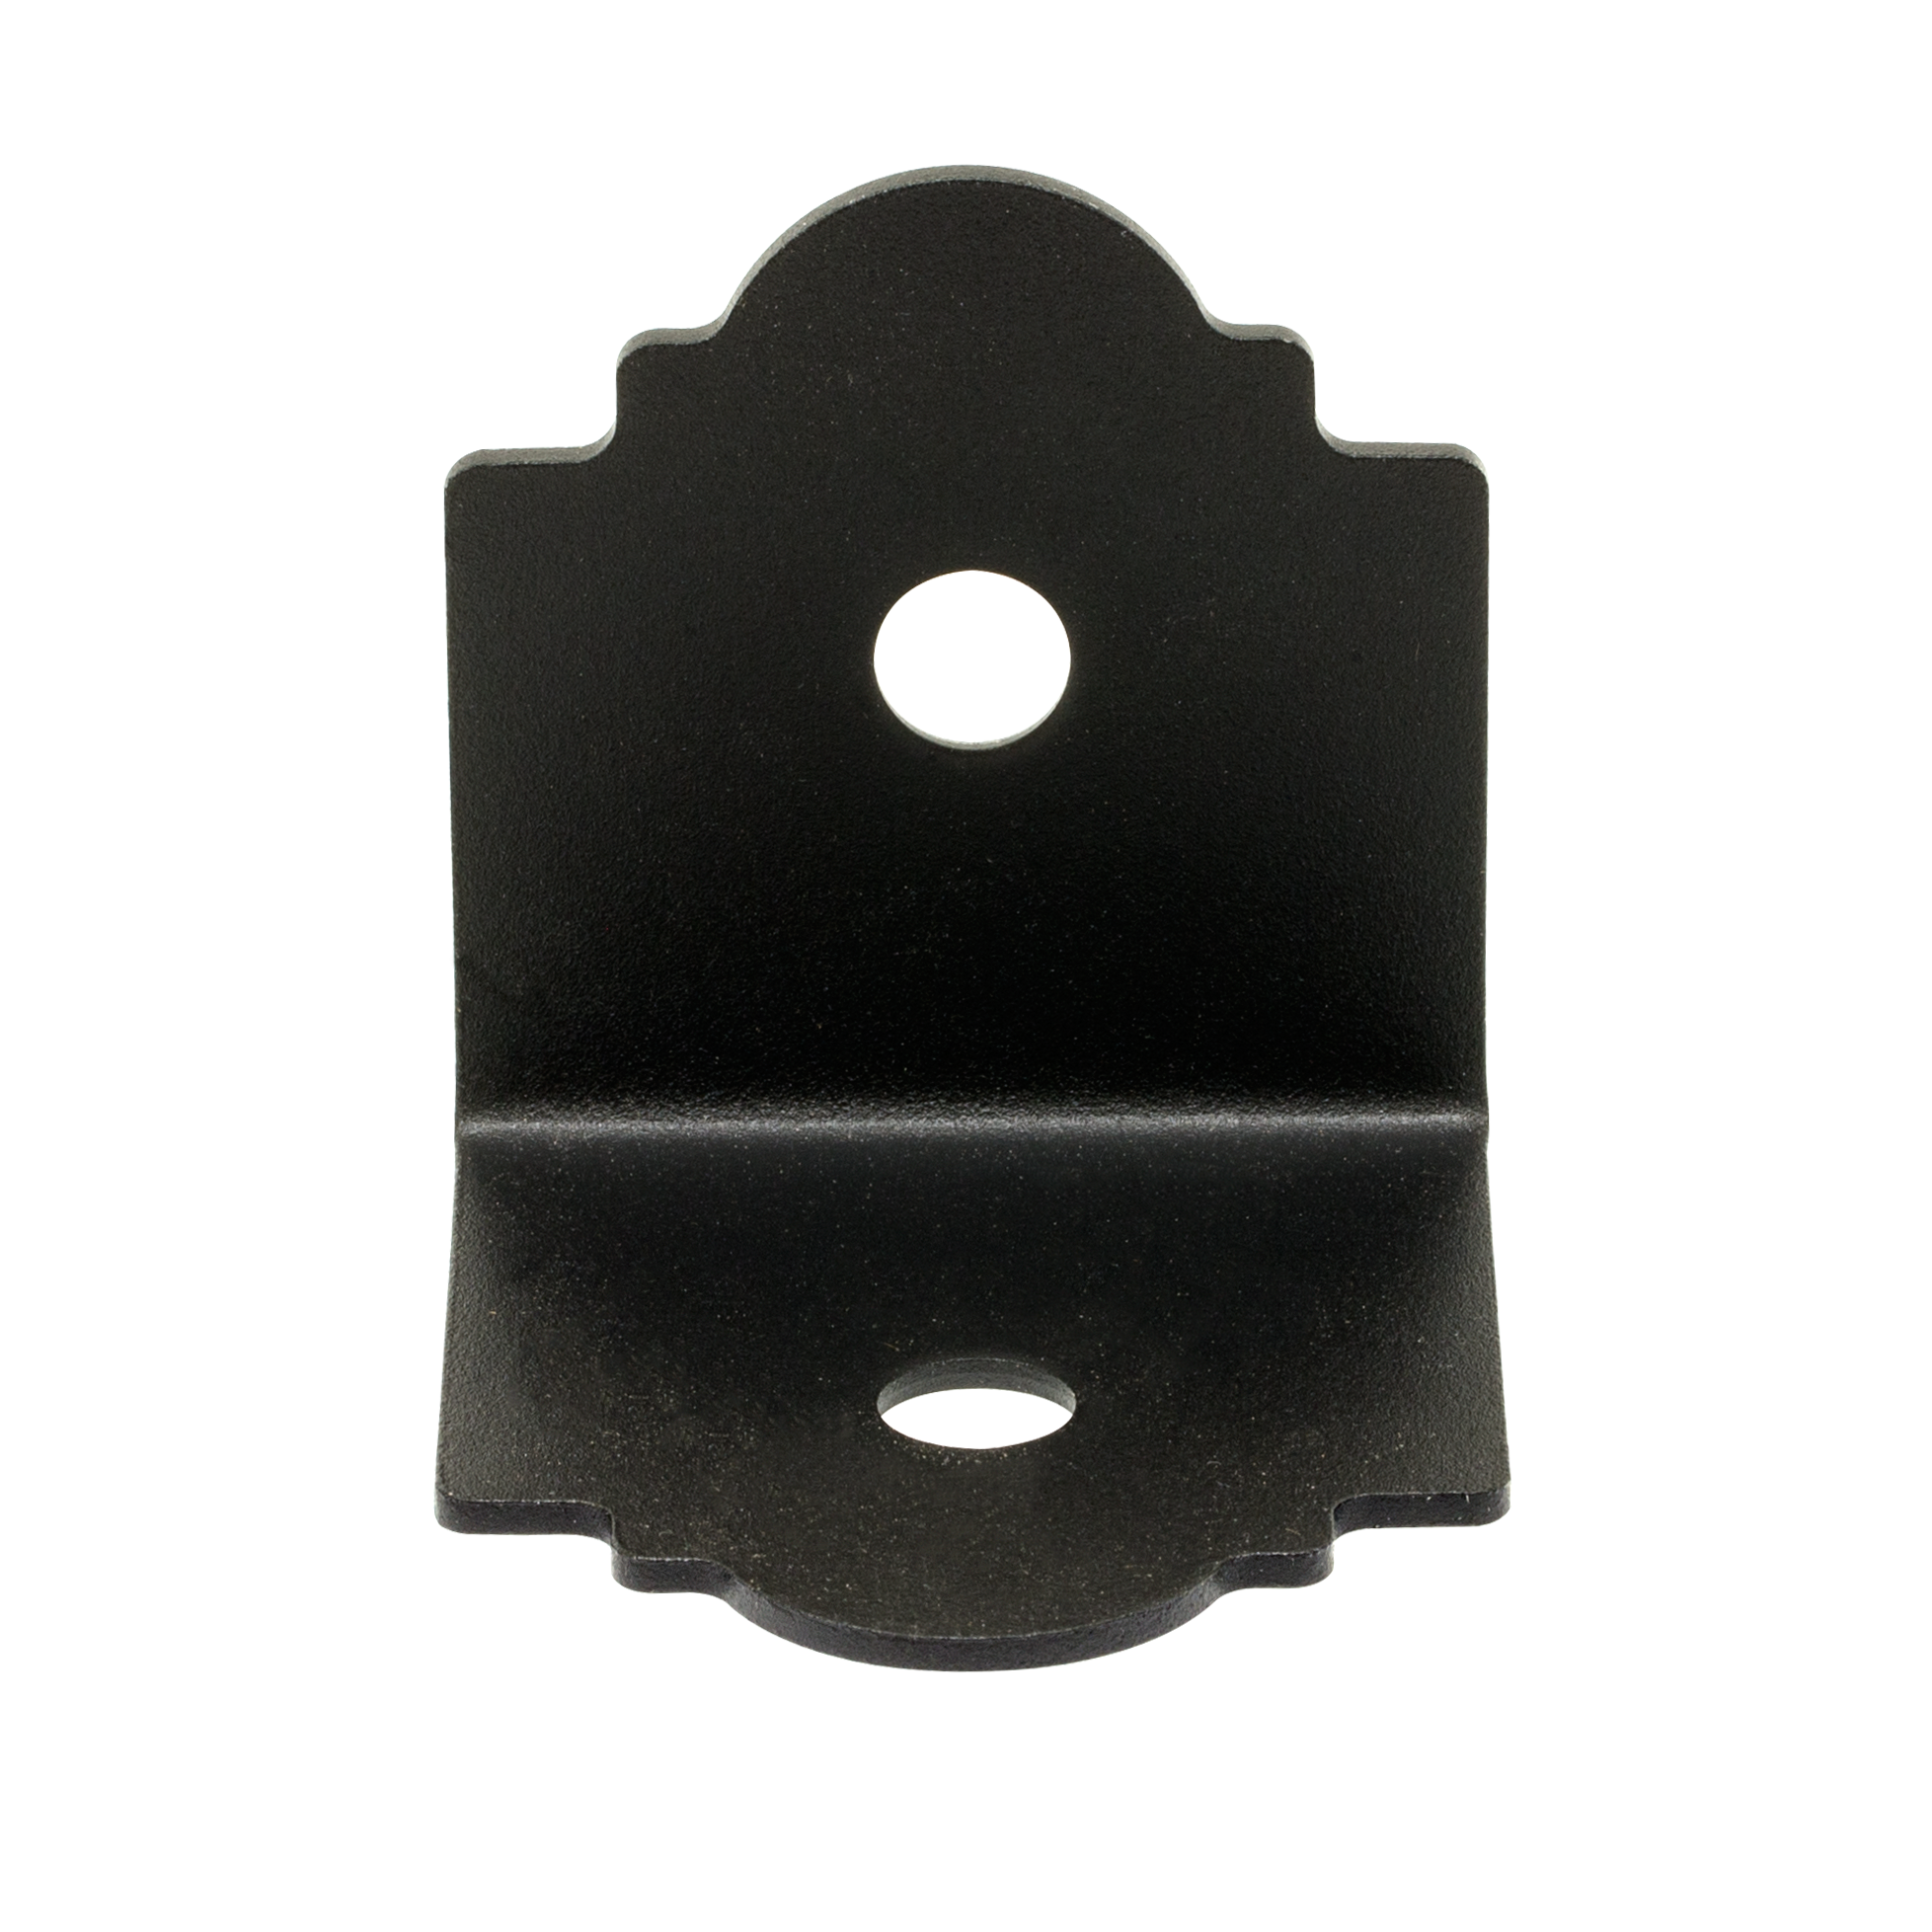 Outdoor Accents® 90° Angle for 4x, ZMAX® Black Powder-Coated